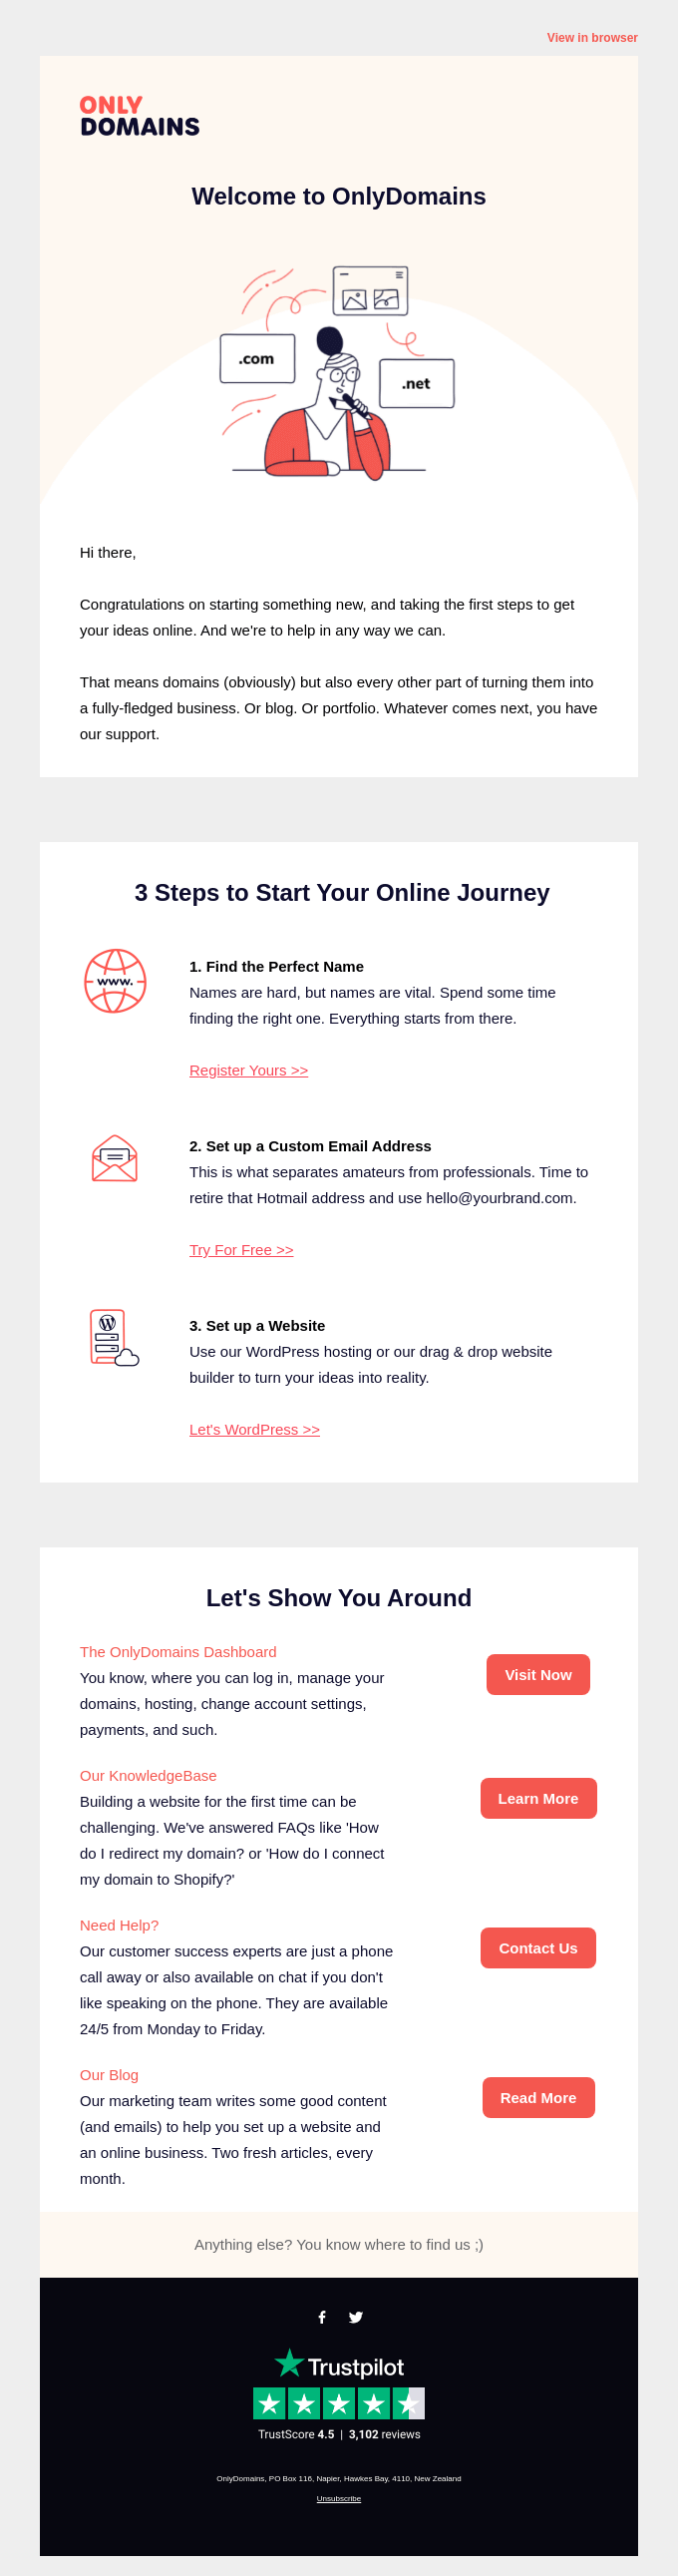 An onboarding email from Onlydomains explaining 3 steps for a user to start their online journey.